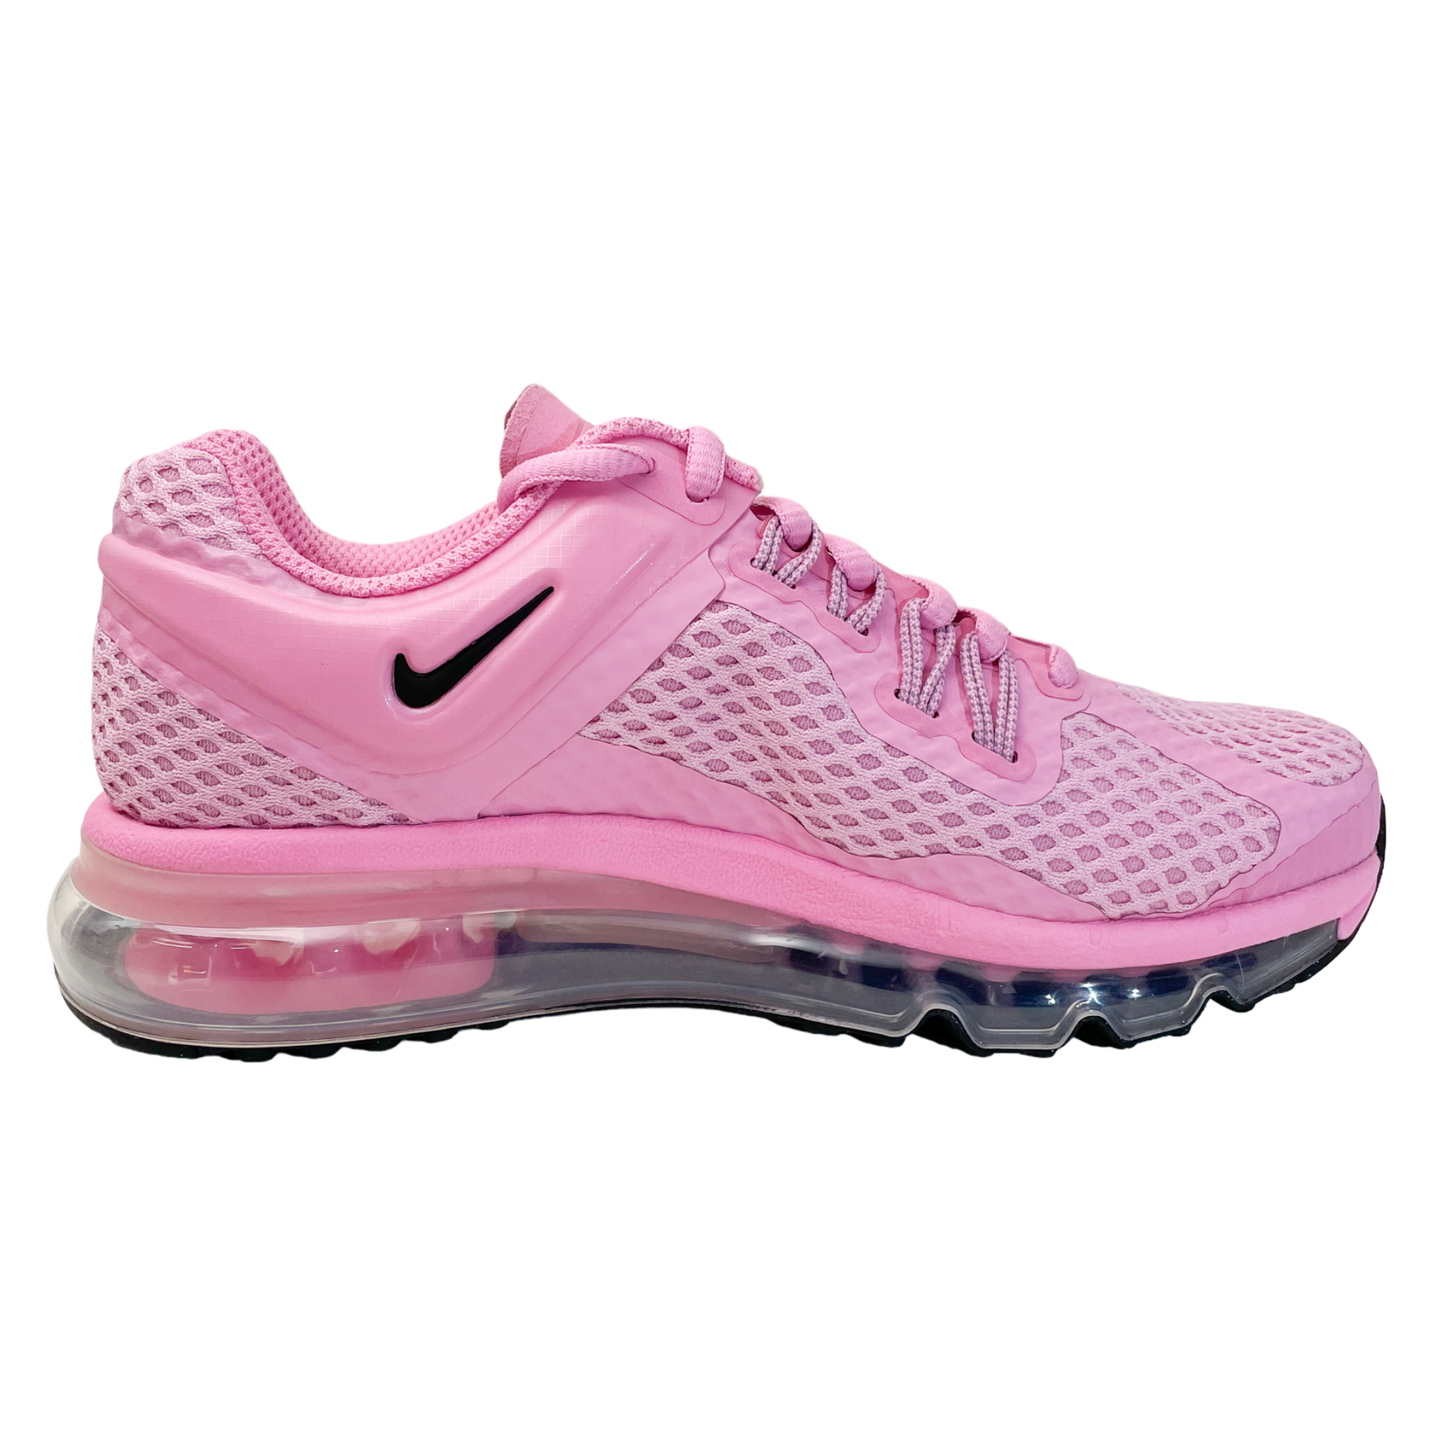 Nike Air Max 2013 Stussy Pink (Damaged OG Box/Replacement Box branded)